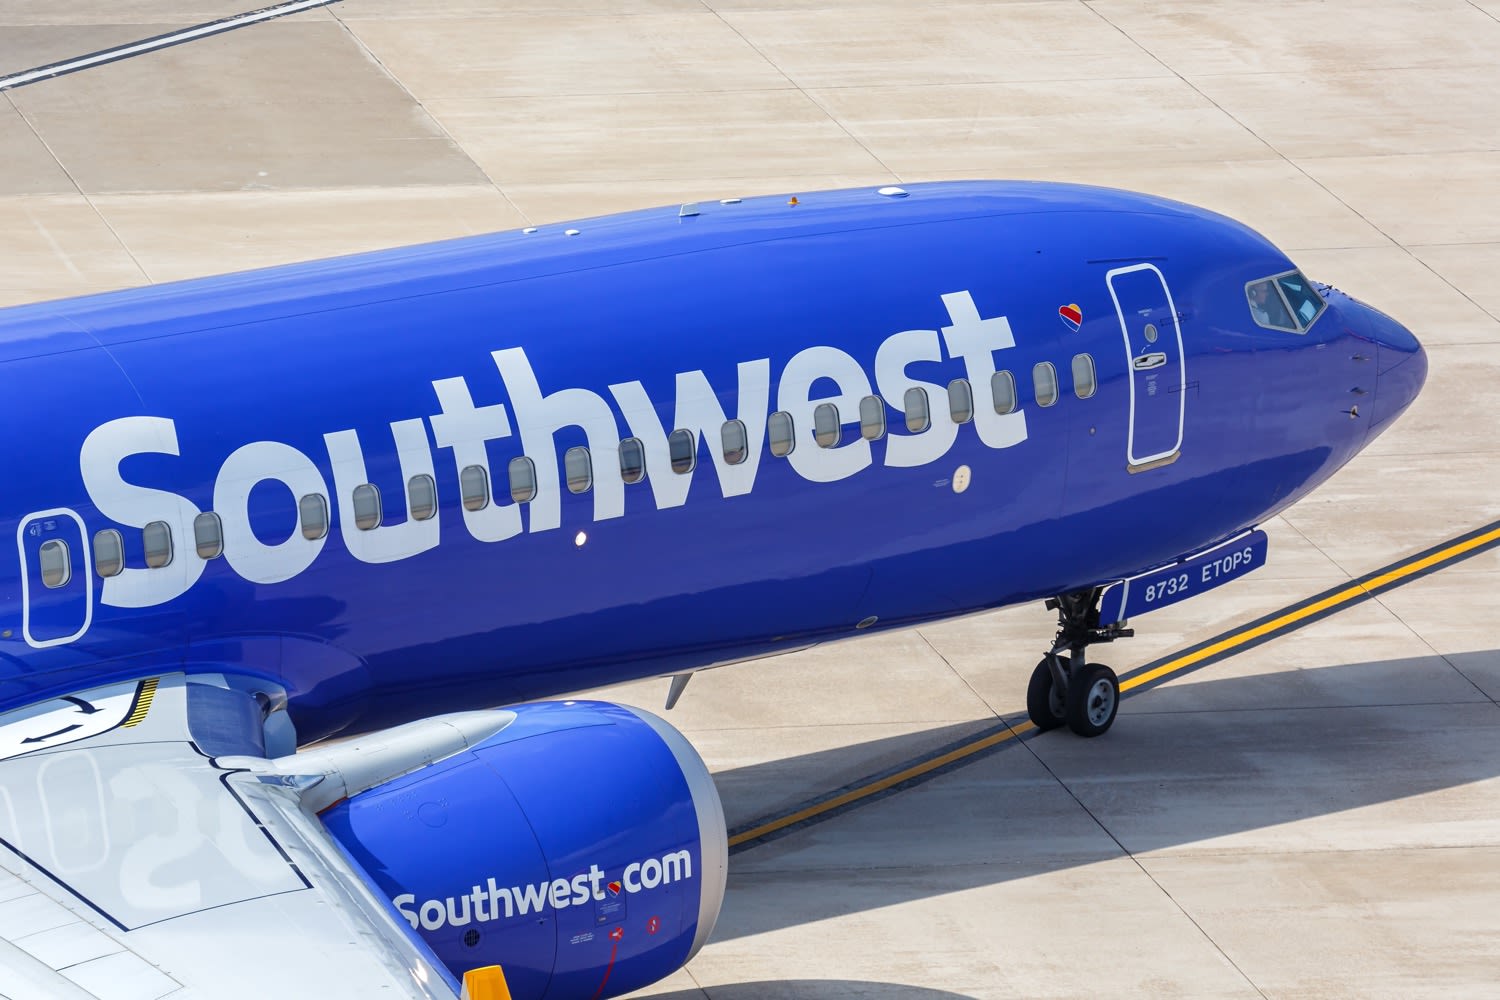 Southwest finally caves, allows Google Flights access to prices